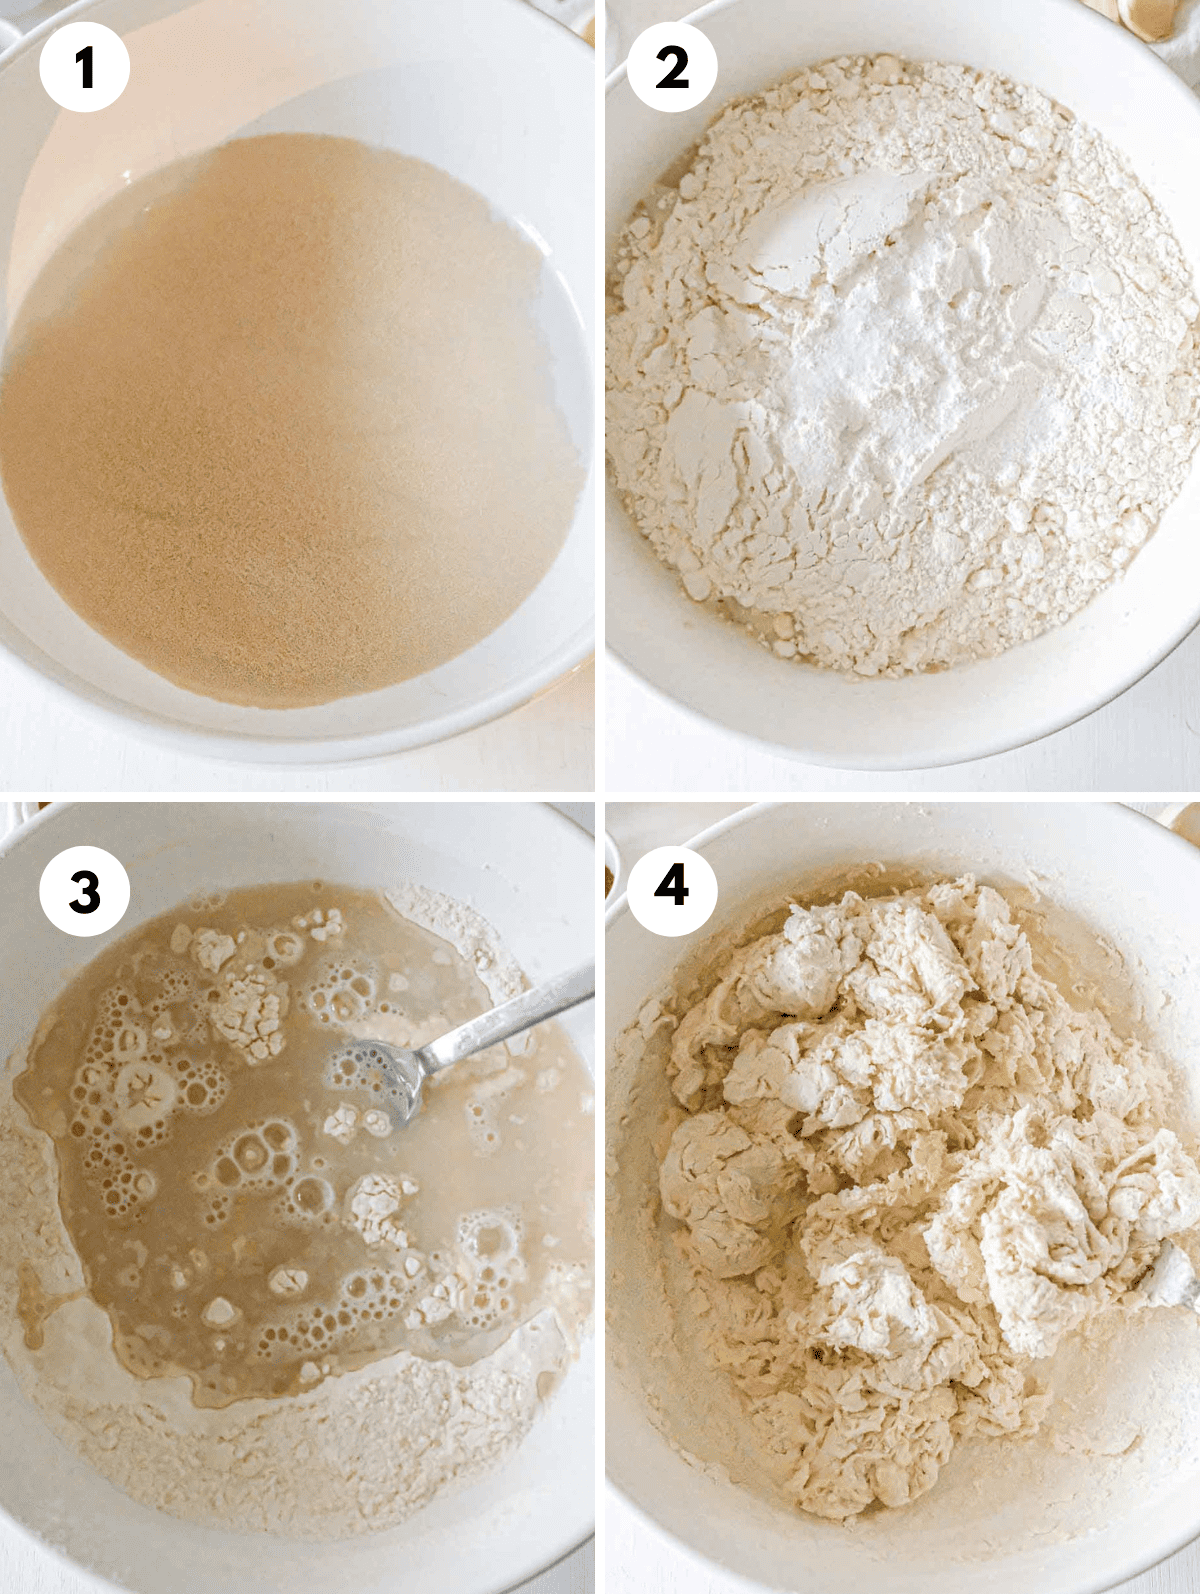 Four steps to make khachapuri dough: 1) bloom the yeast in water 2) mix the flour and salt 3) pour the water into the flour and mix 4) once all the water is in the dough will be shaggy and ready to knead.